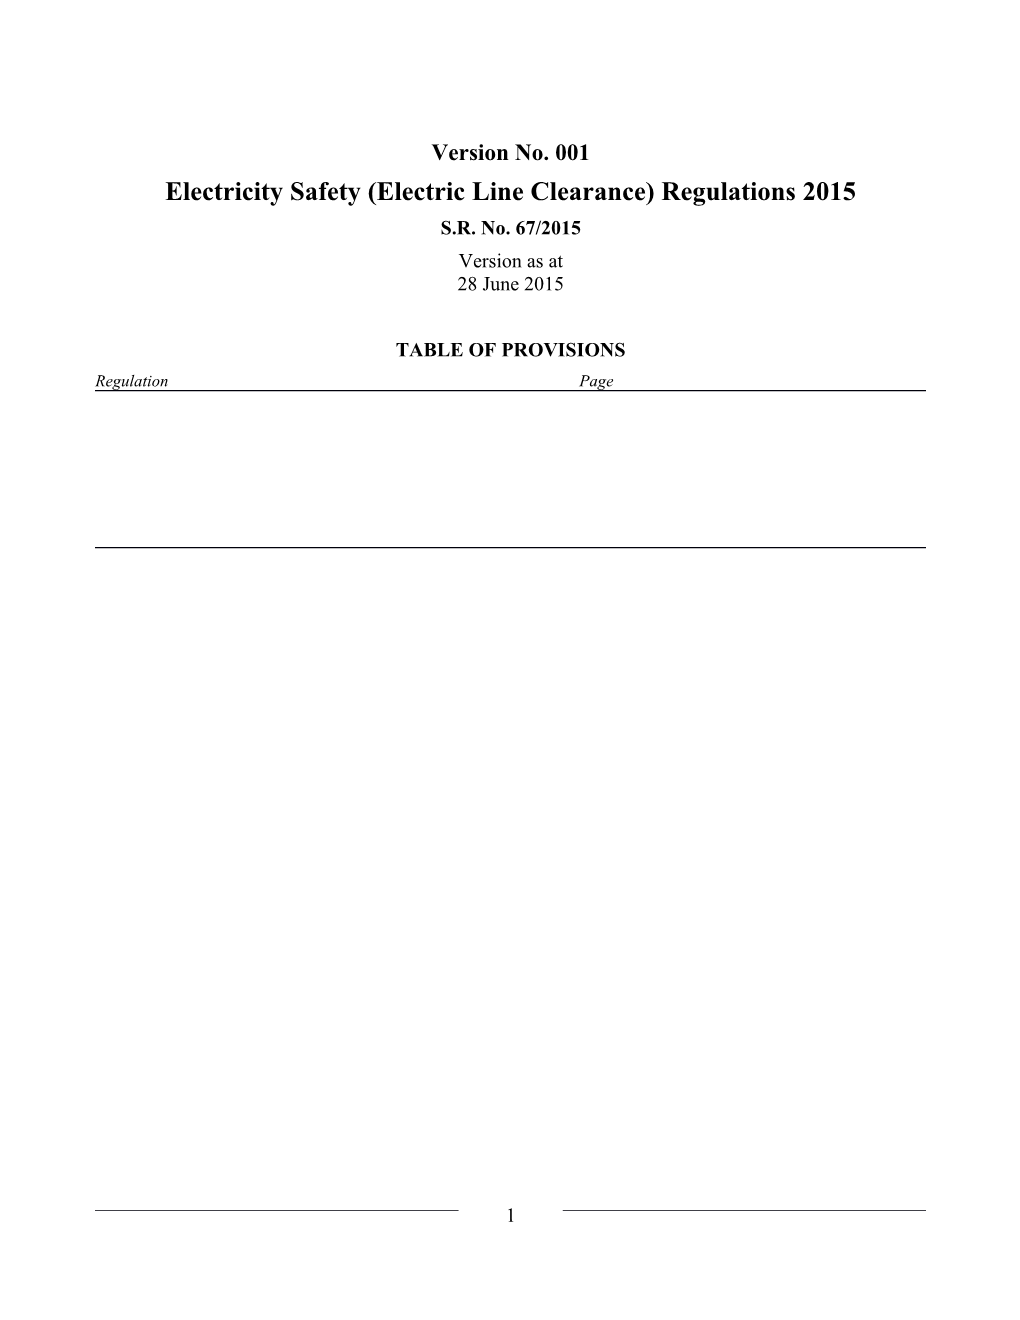 Electricity Safety (Electric Line Clearance) Regulations 2015